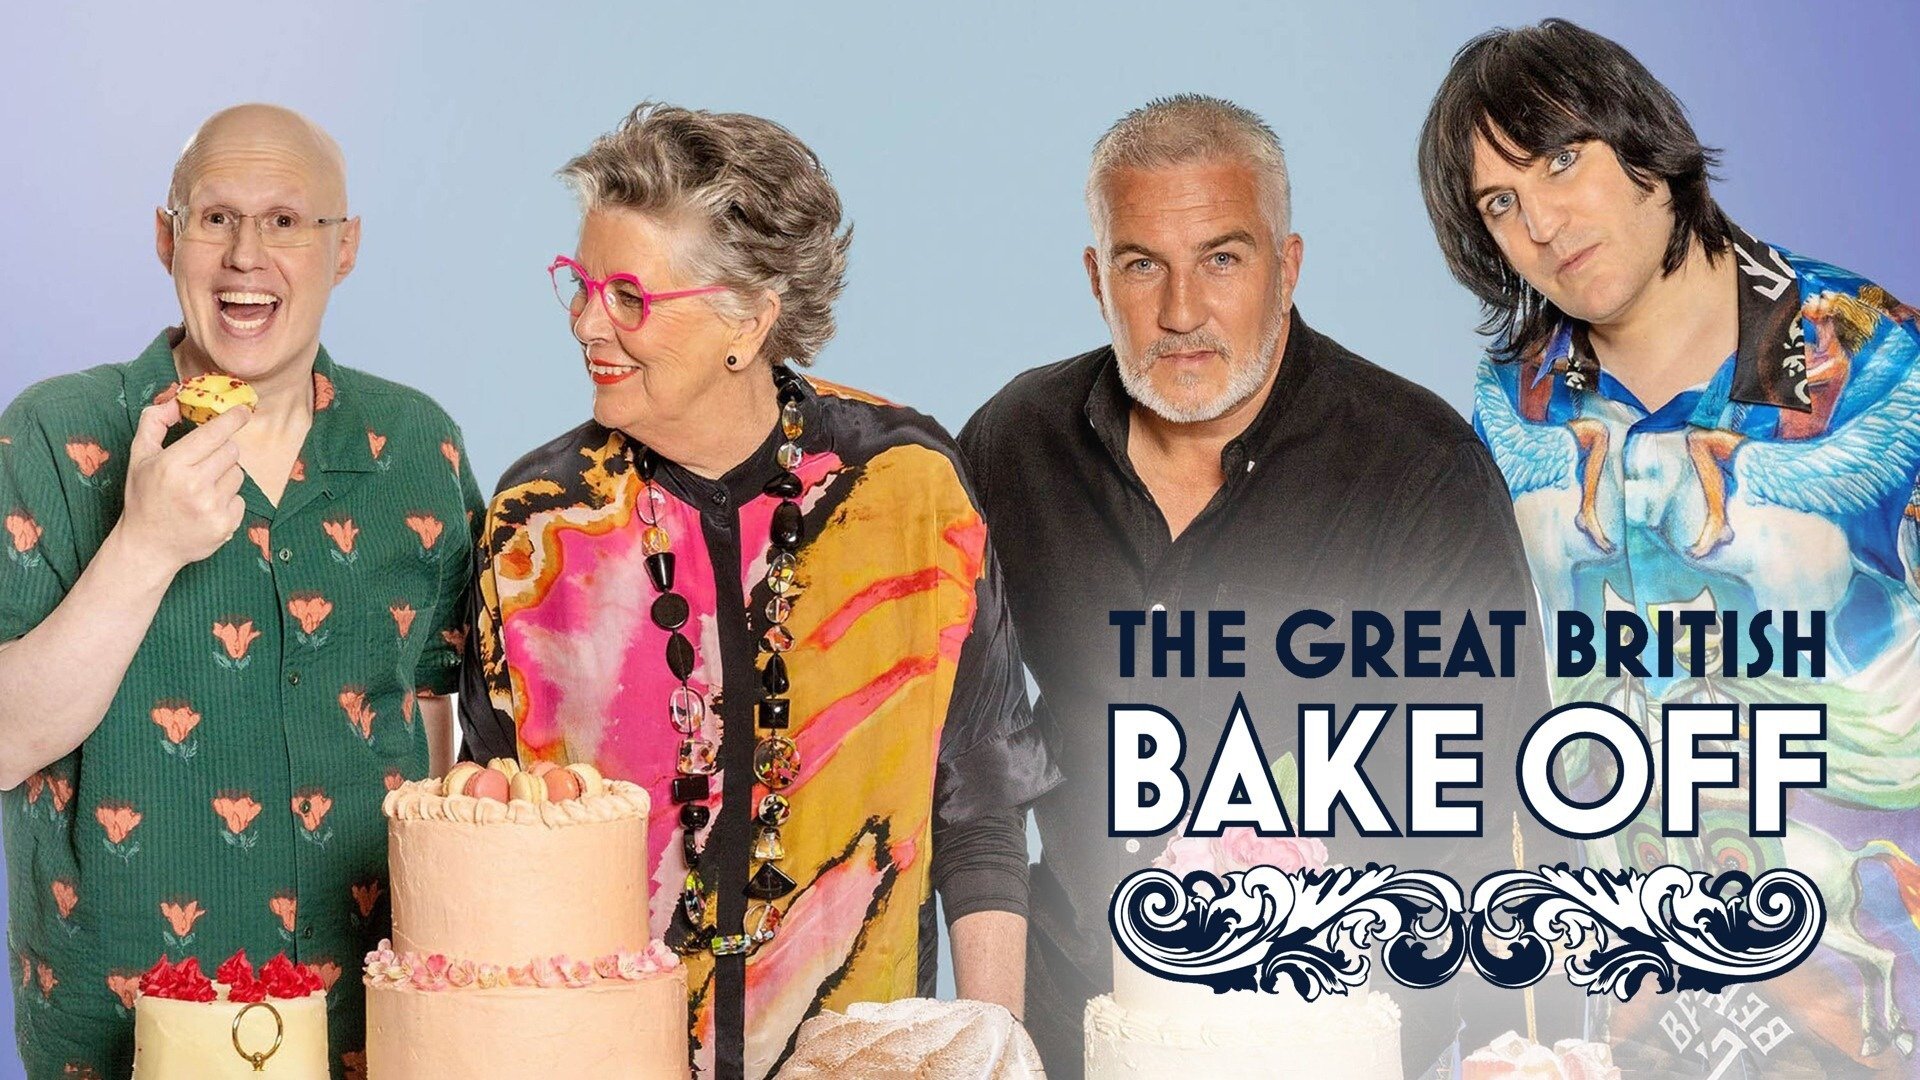 The Great British Bake Off - Netflix Reality Series